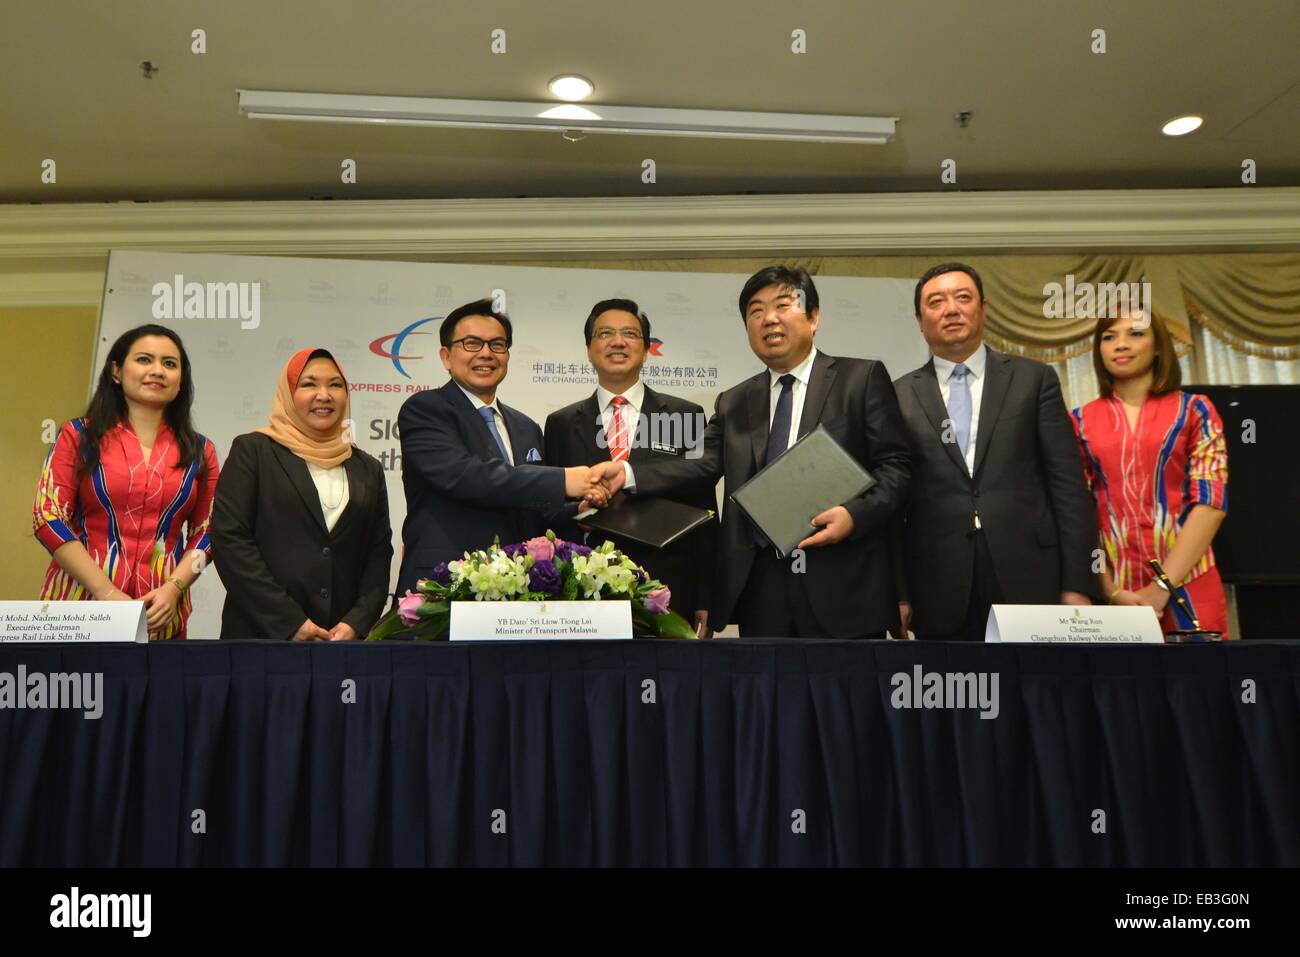 Kuala Lampur, Malaysia. 25th Nov, 2014. Representatives shake hands after signing an agreement in Kuala Lampur, Malaysia, Nov. 25, 2014. China's CNR Changchun Railway Vehicles Co., Ltd. (CRC) signed here Tuesday an agreement with Malaysia's Express Rail Link Sdn. Bhd. (ERL) to supply six sets of four-car trains to the line from Kuala Lumpur city center to Kuala Lumpur International Airport. © Chong Voon Chung/Xinhua/Alamy Live News Stock Photo